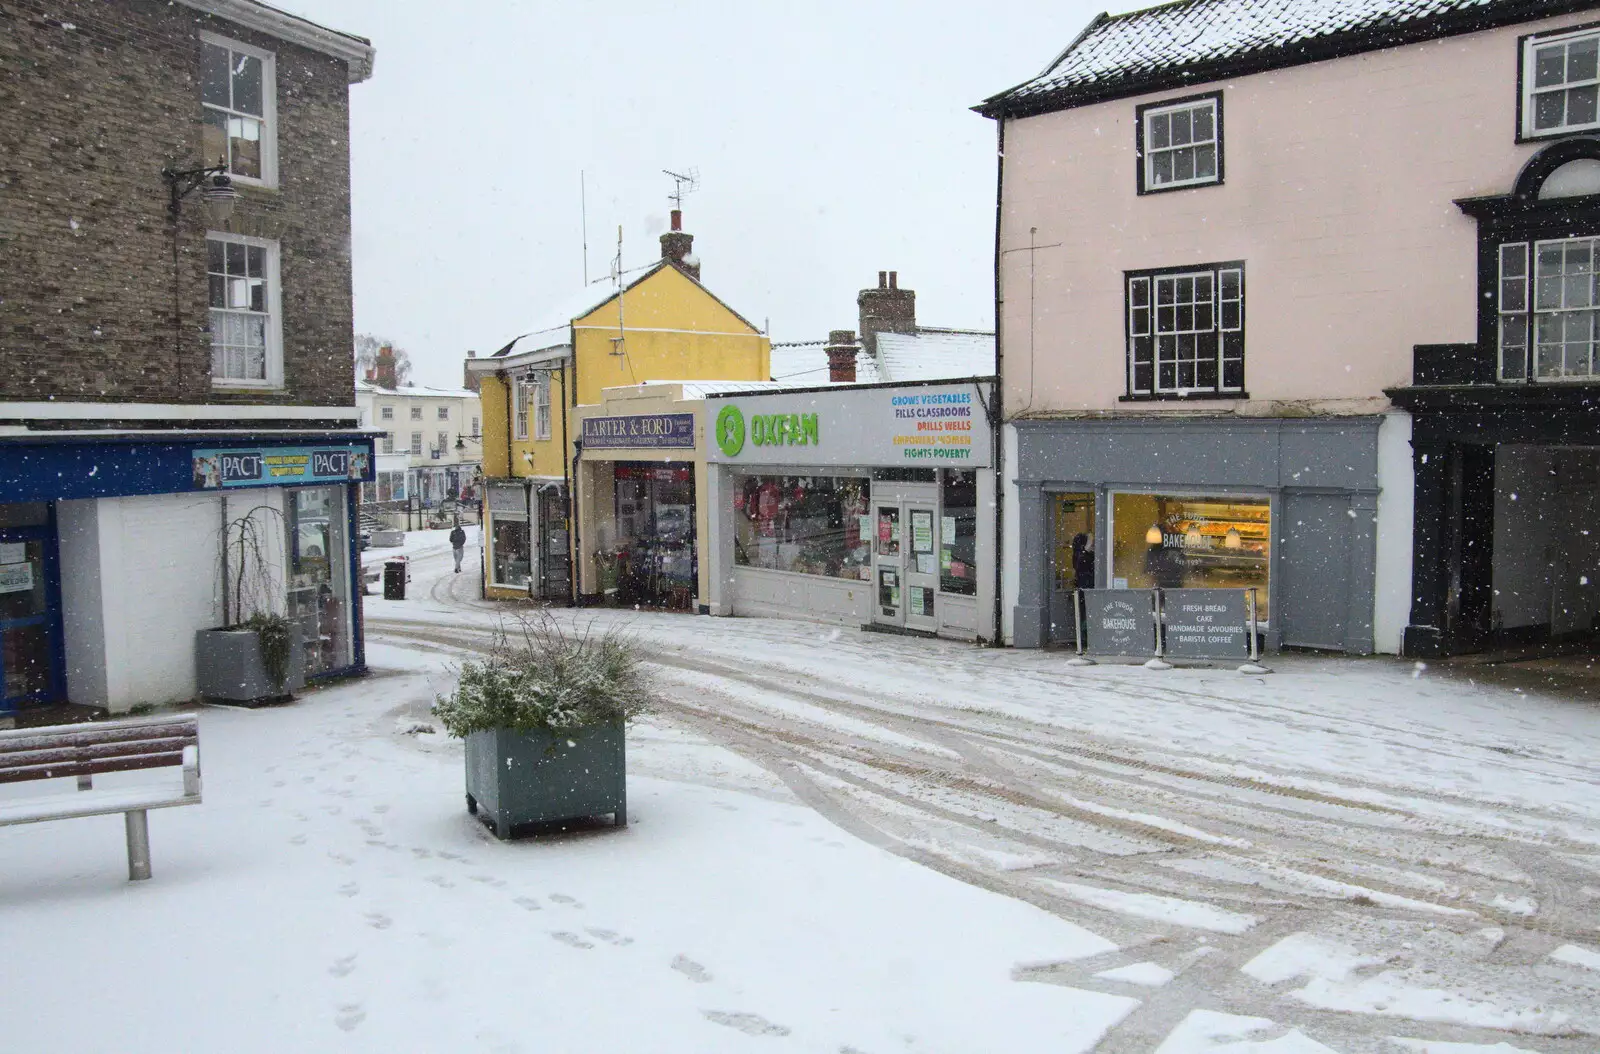 Larter and Ford, and Oxfam, from A Snowy Morning, Diss, Norfolk - 16th January 2021